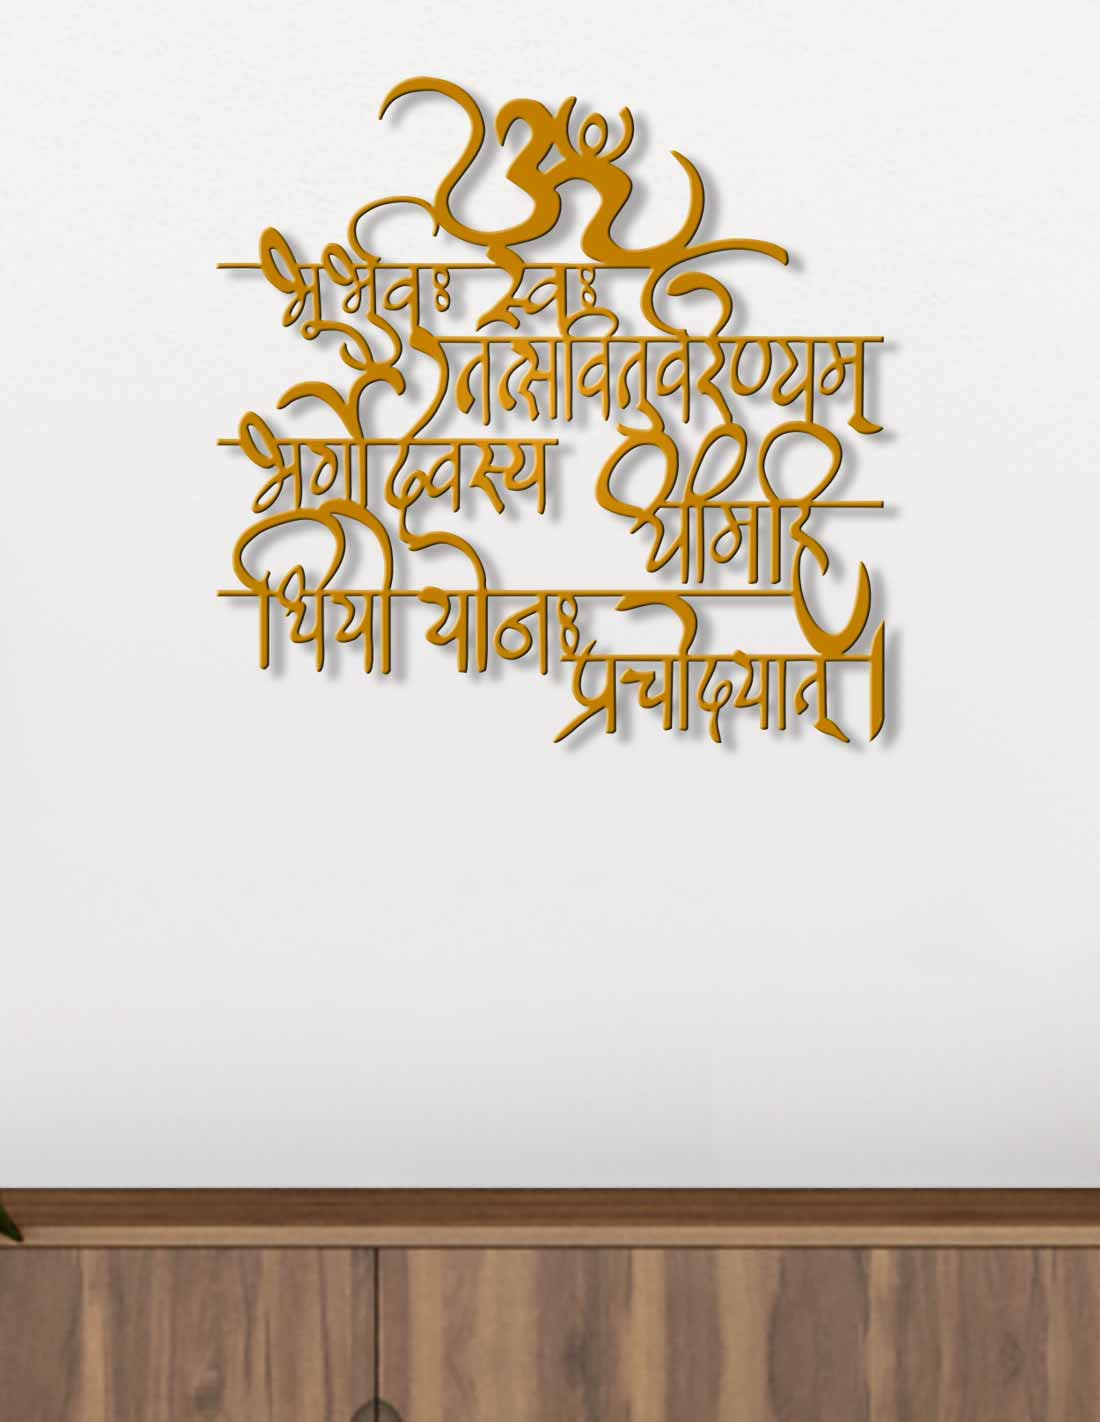 Buy Artvibes Gayatri Mantra Decorative Wall Hanging Wooden Art Decoration  item for Living Room | Bedroom | Home Decor | Gifts | Quotes Decor Item |  Wall Art For Hall | Mdf